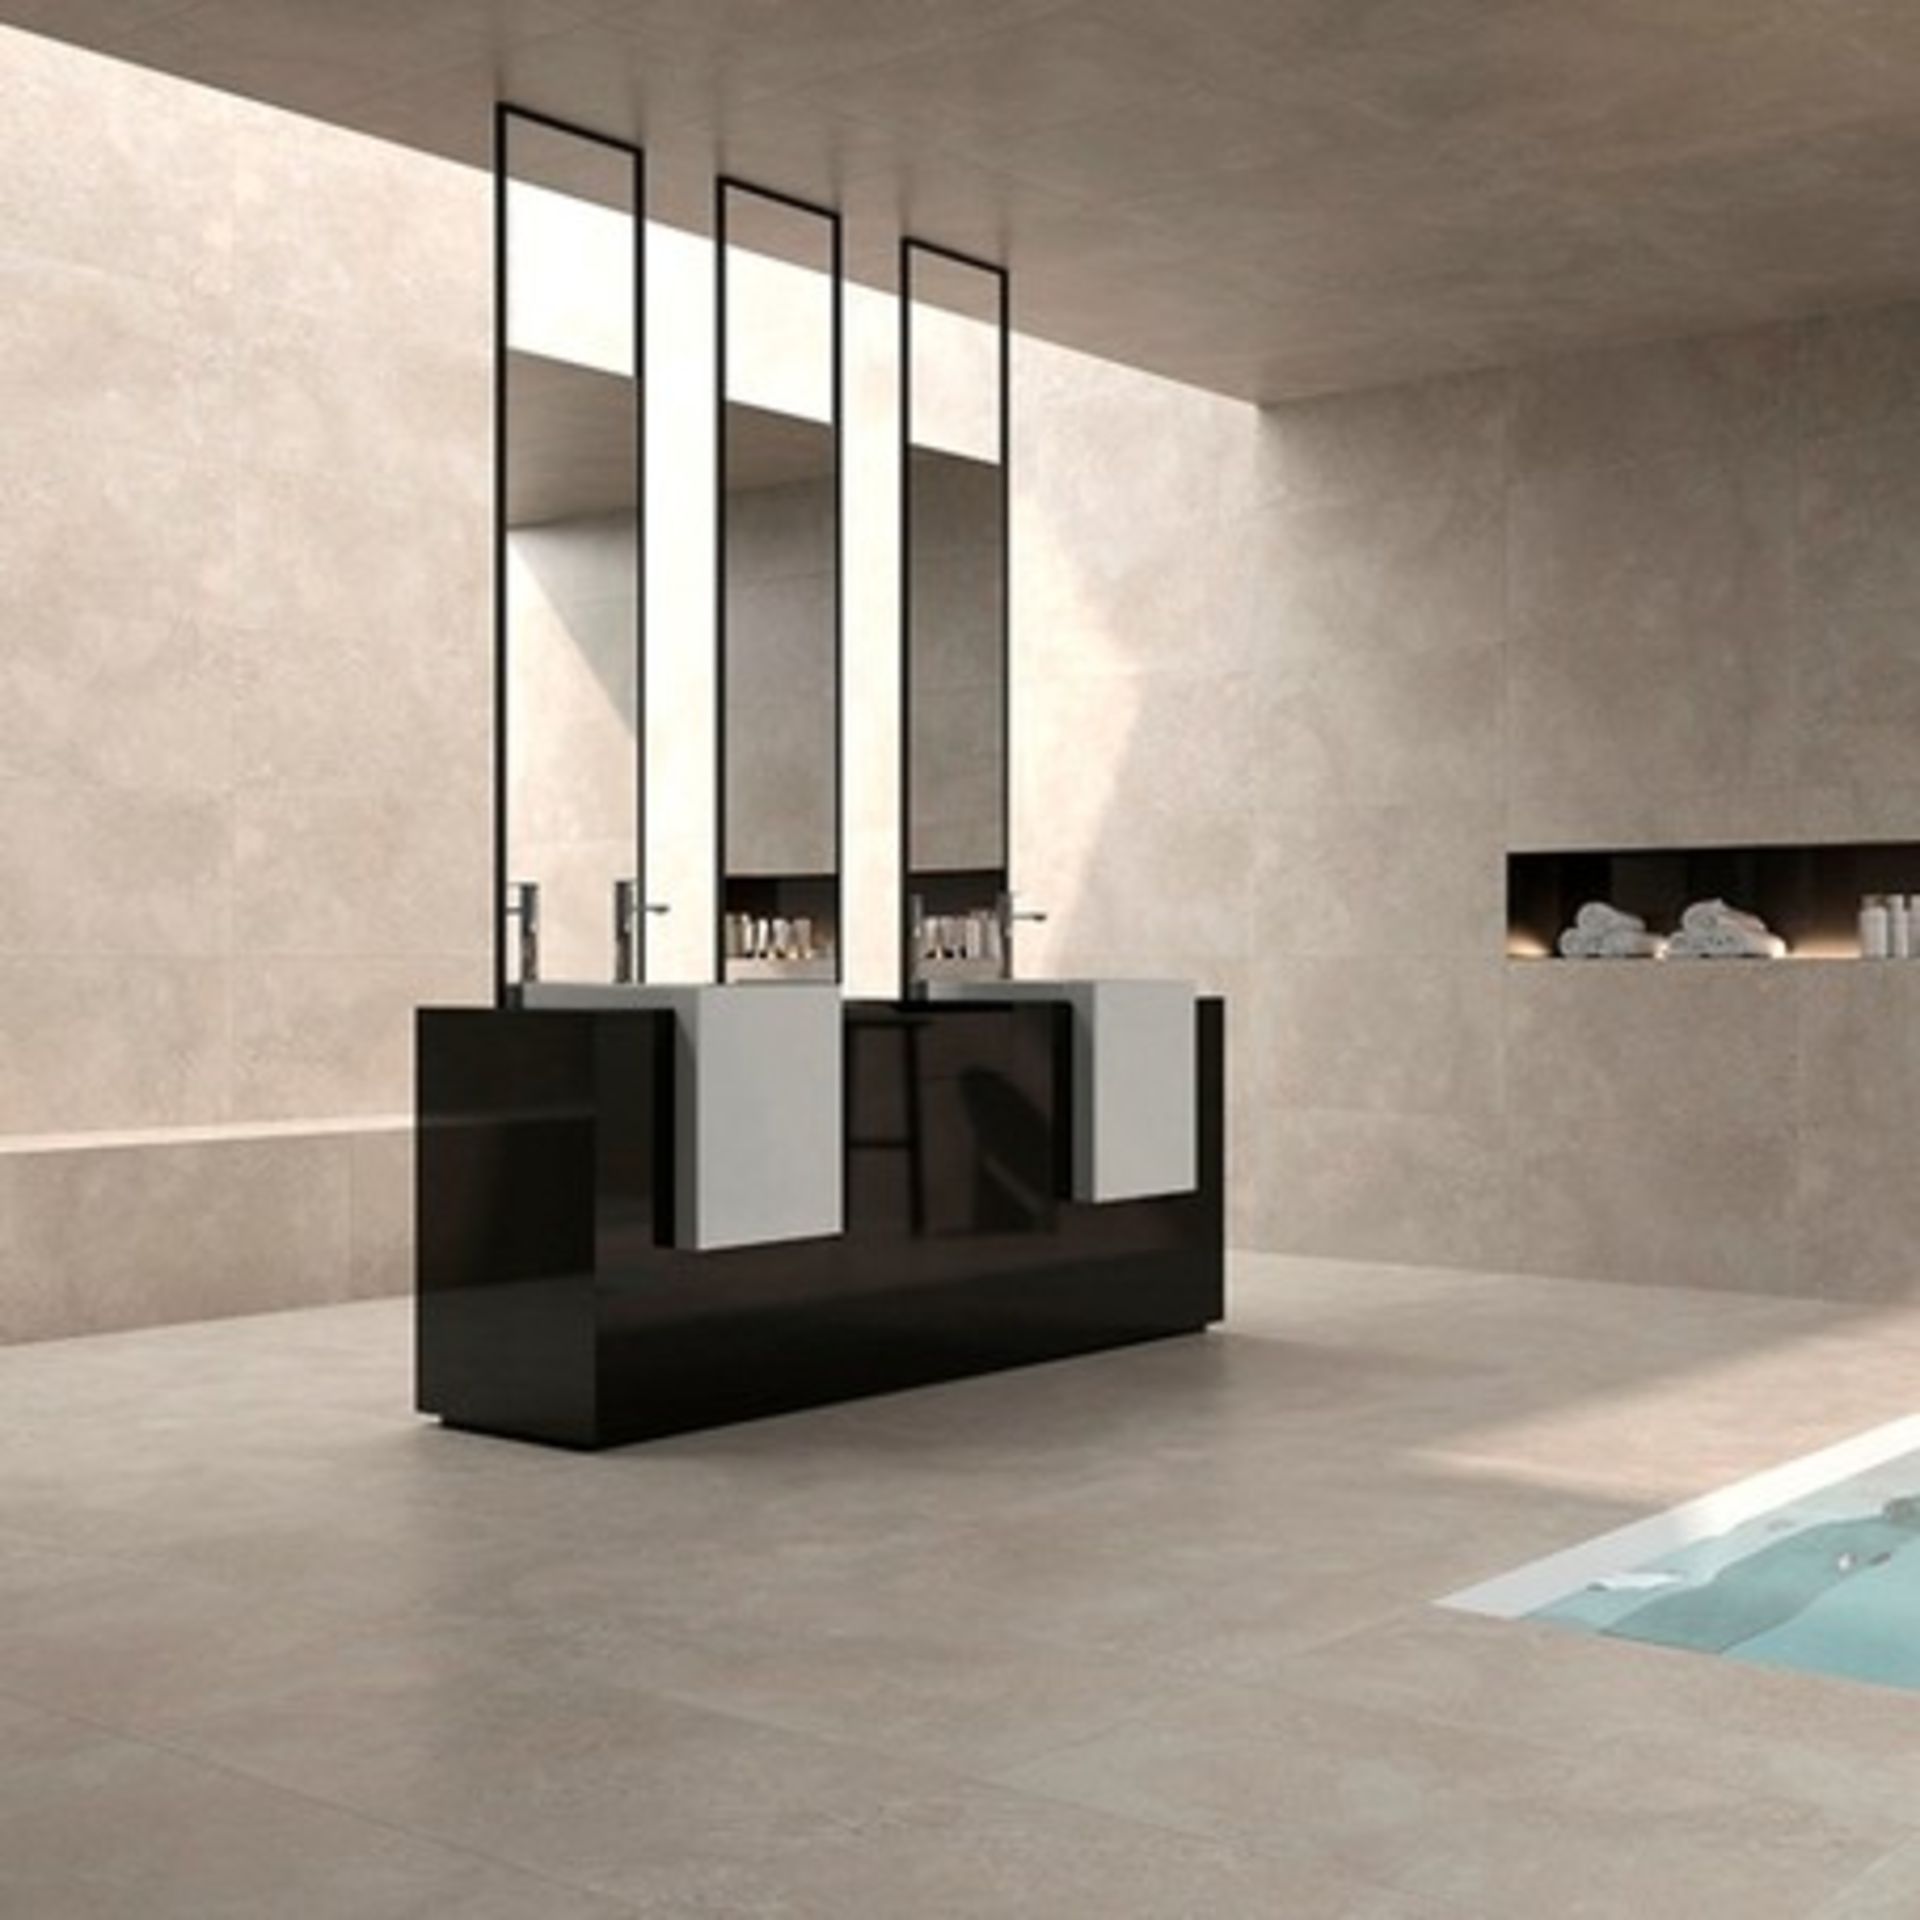 NEW 9m2 Michigan Noce Matte Wall and Floor Tiles. 440x440mm per tile, 8mm thick. These trend ... - Image 3 of 3